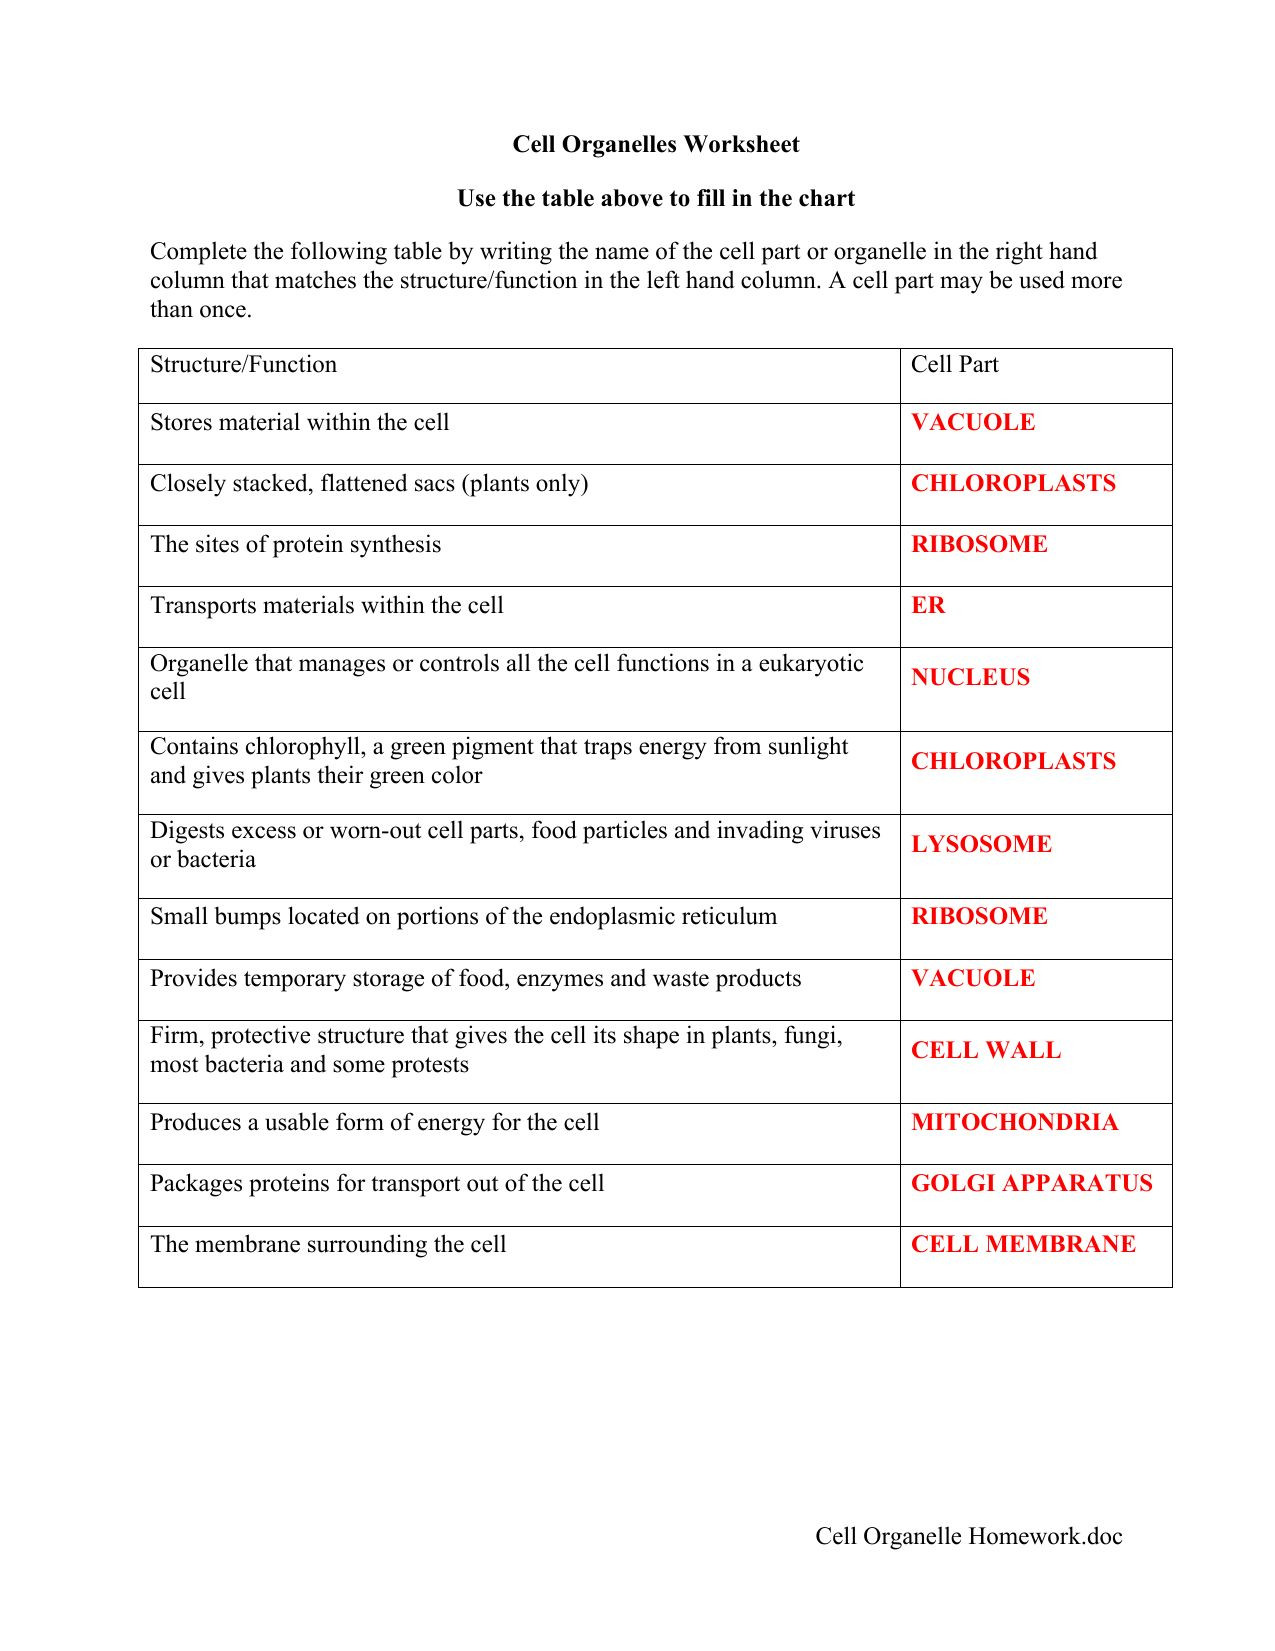 Cells and organelles Worksheet Cell Basic Unit Life Lessons Tes Teach